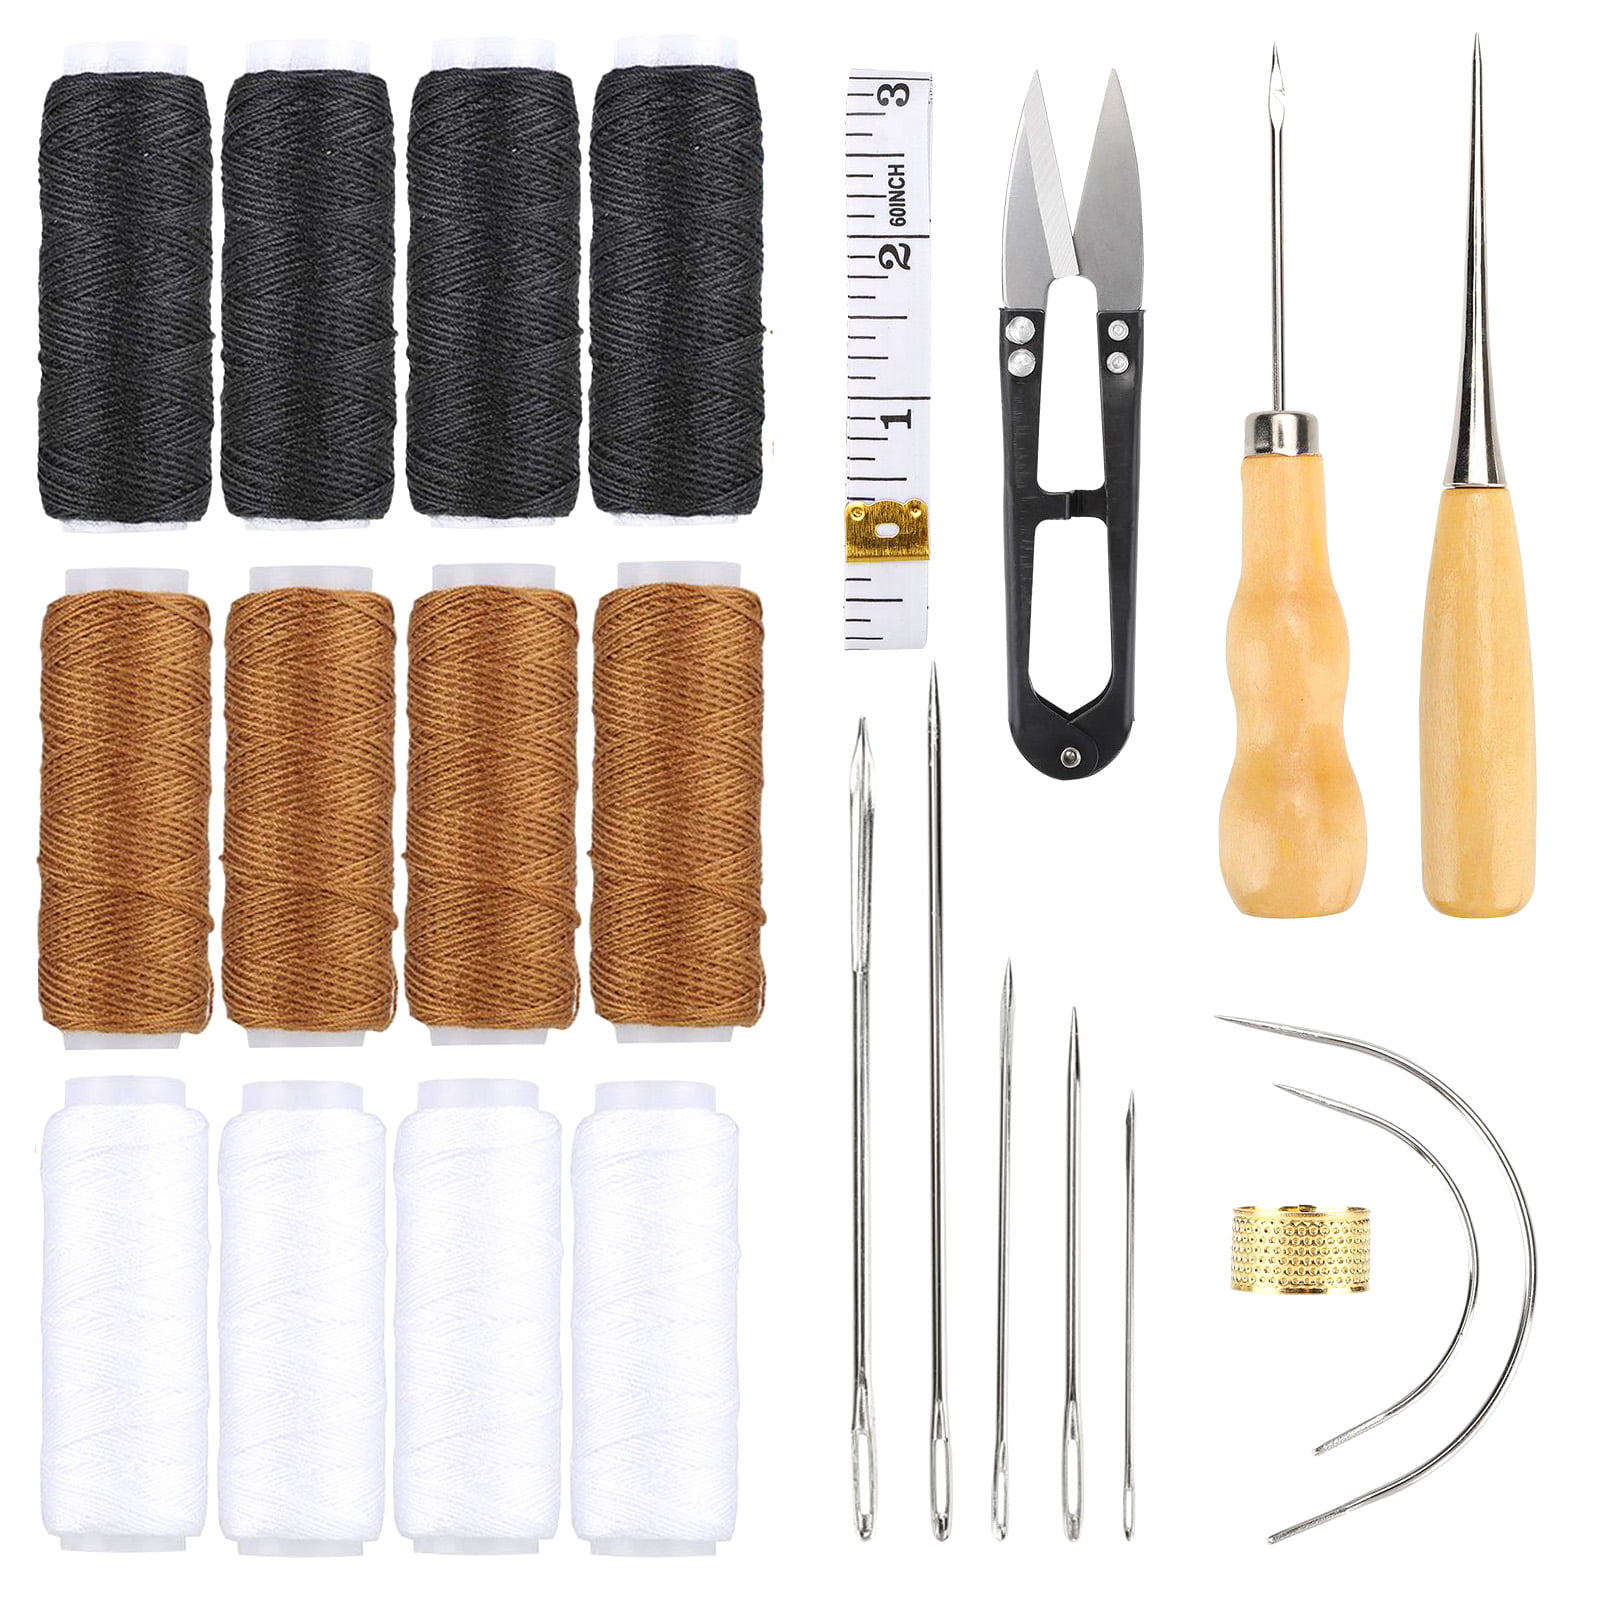 7 Pieces Curved Upholstery Hand Sewing Needles Sewing Needles with Leather Waxed Thread Cord 1 Brown 1 Black and Drilling Awl and Thimble for Leather Repair 